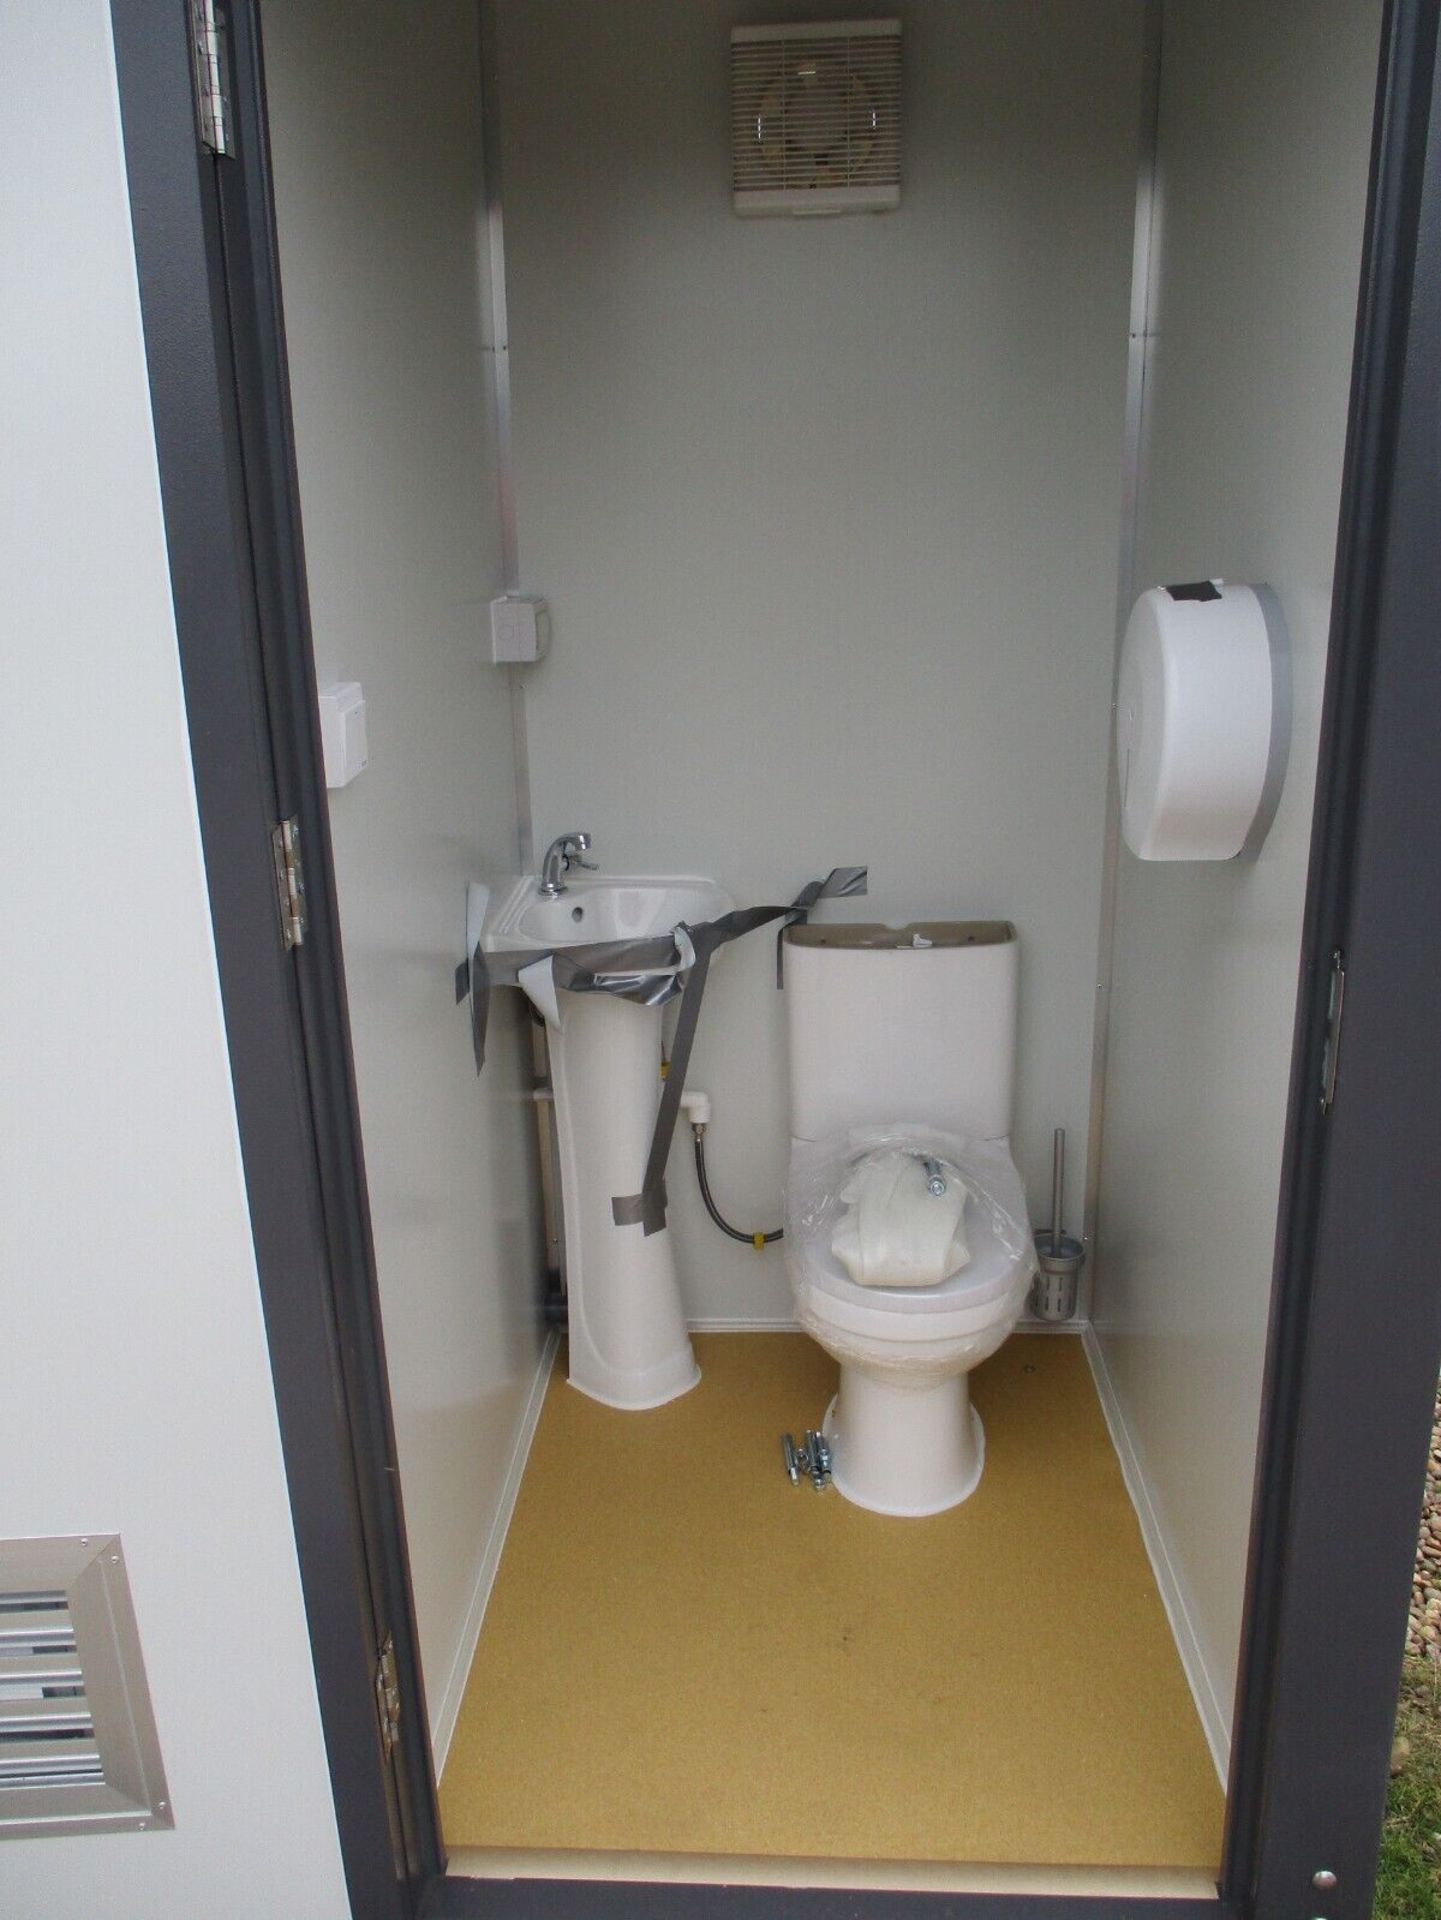 2.15M X 1.3M DOUBLE TOILET BLOCK SECURE SHIPPING CONTAINER - Image 8 of 9